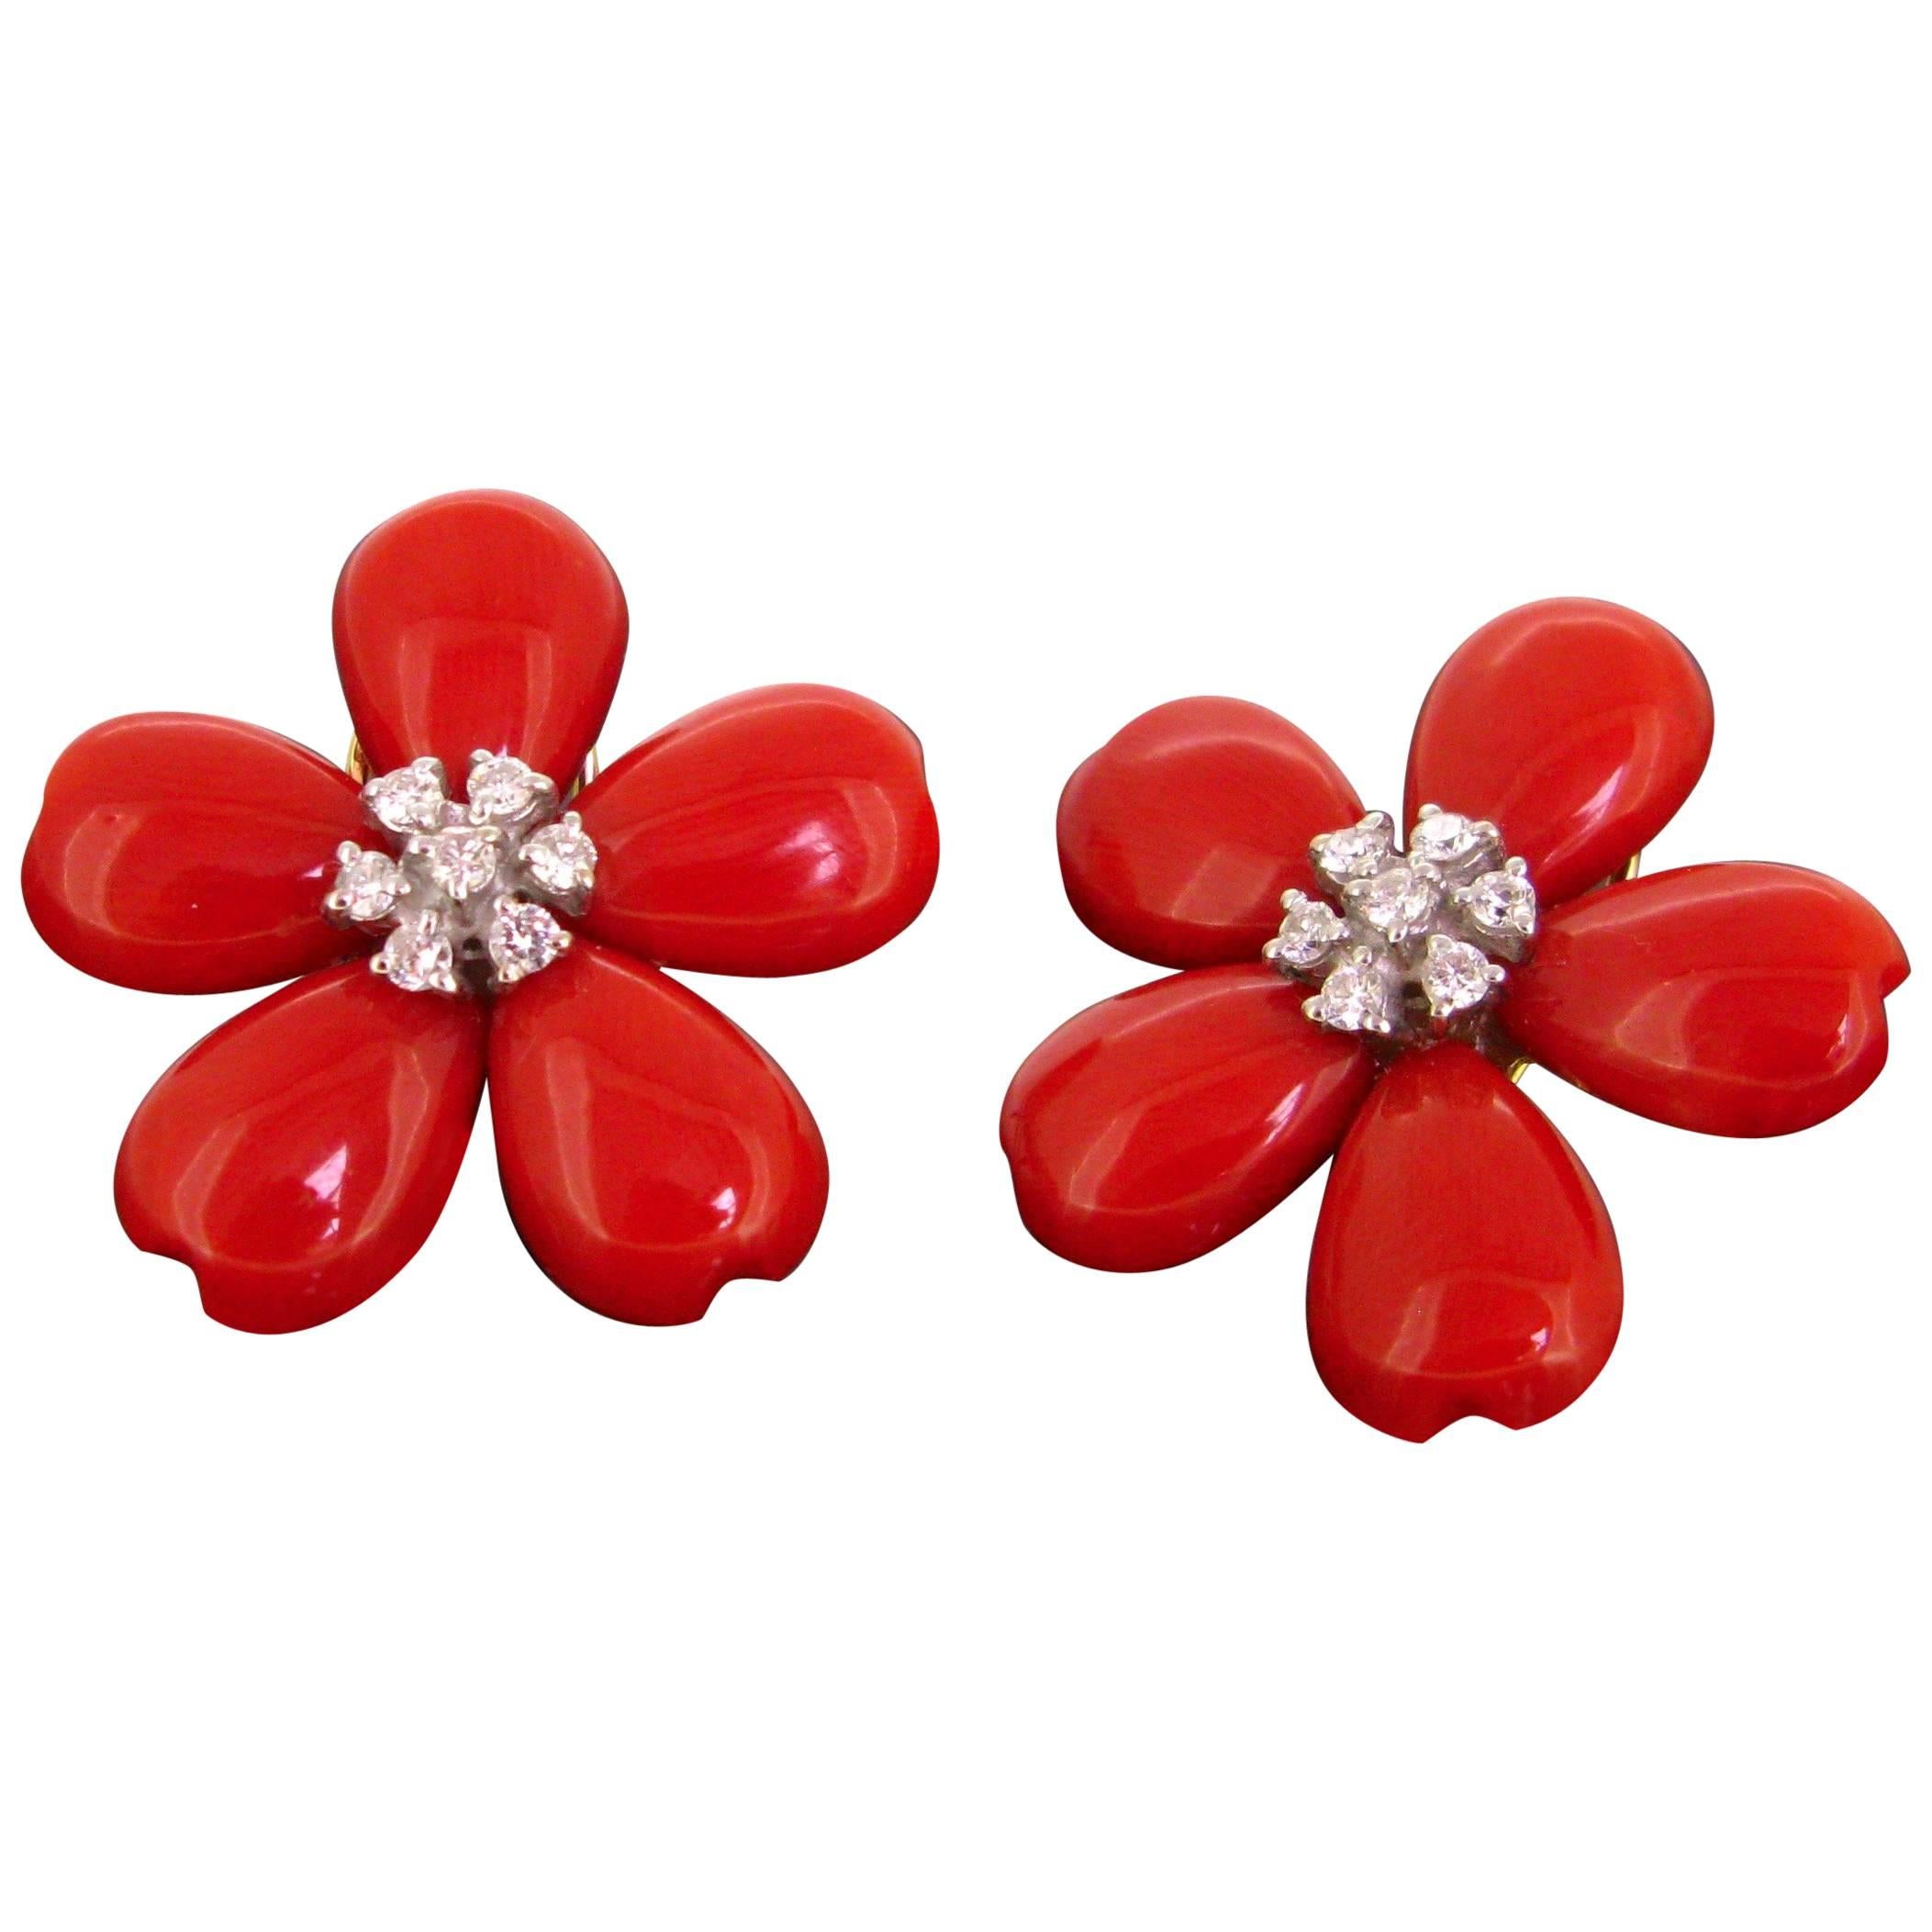 Modern Flower Petals Corals and Brilliant cut Diamonds Earrings Clips